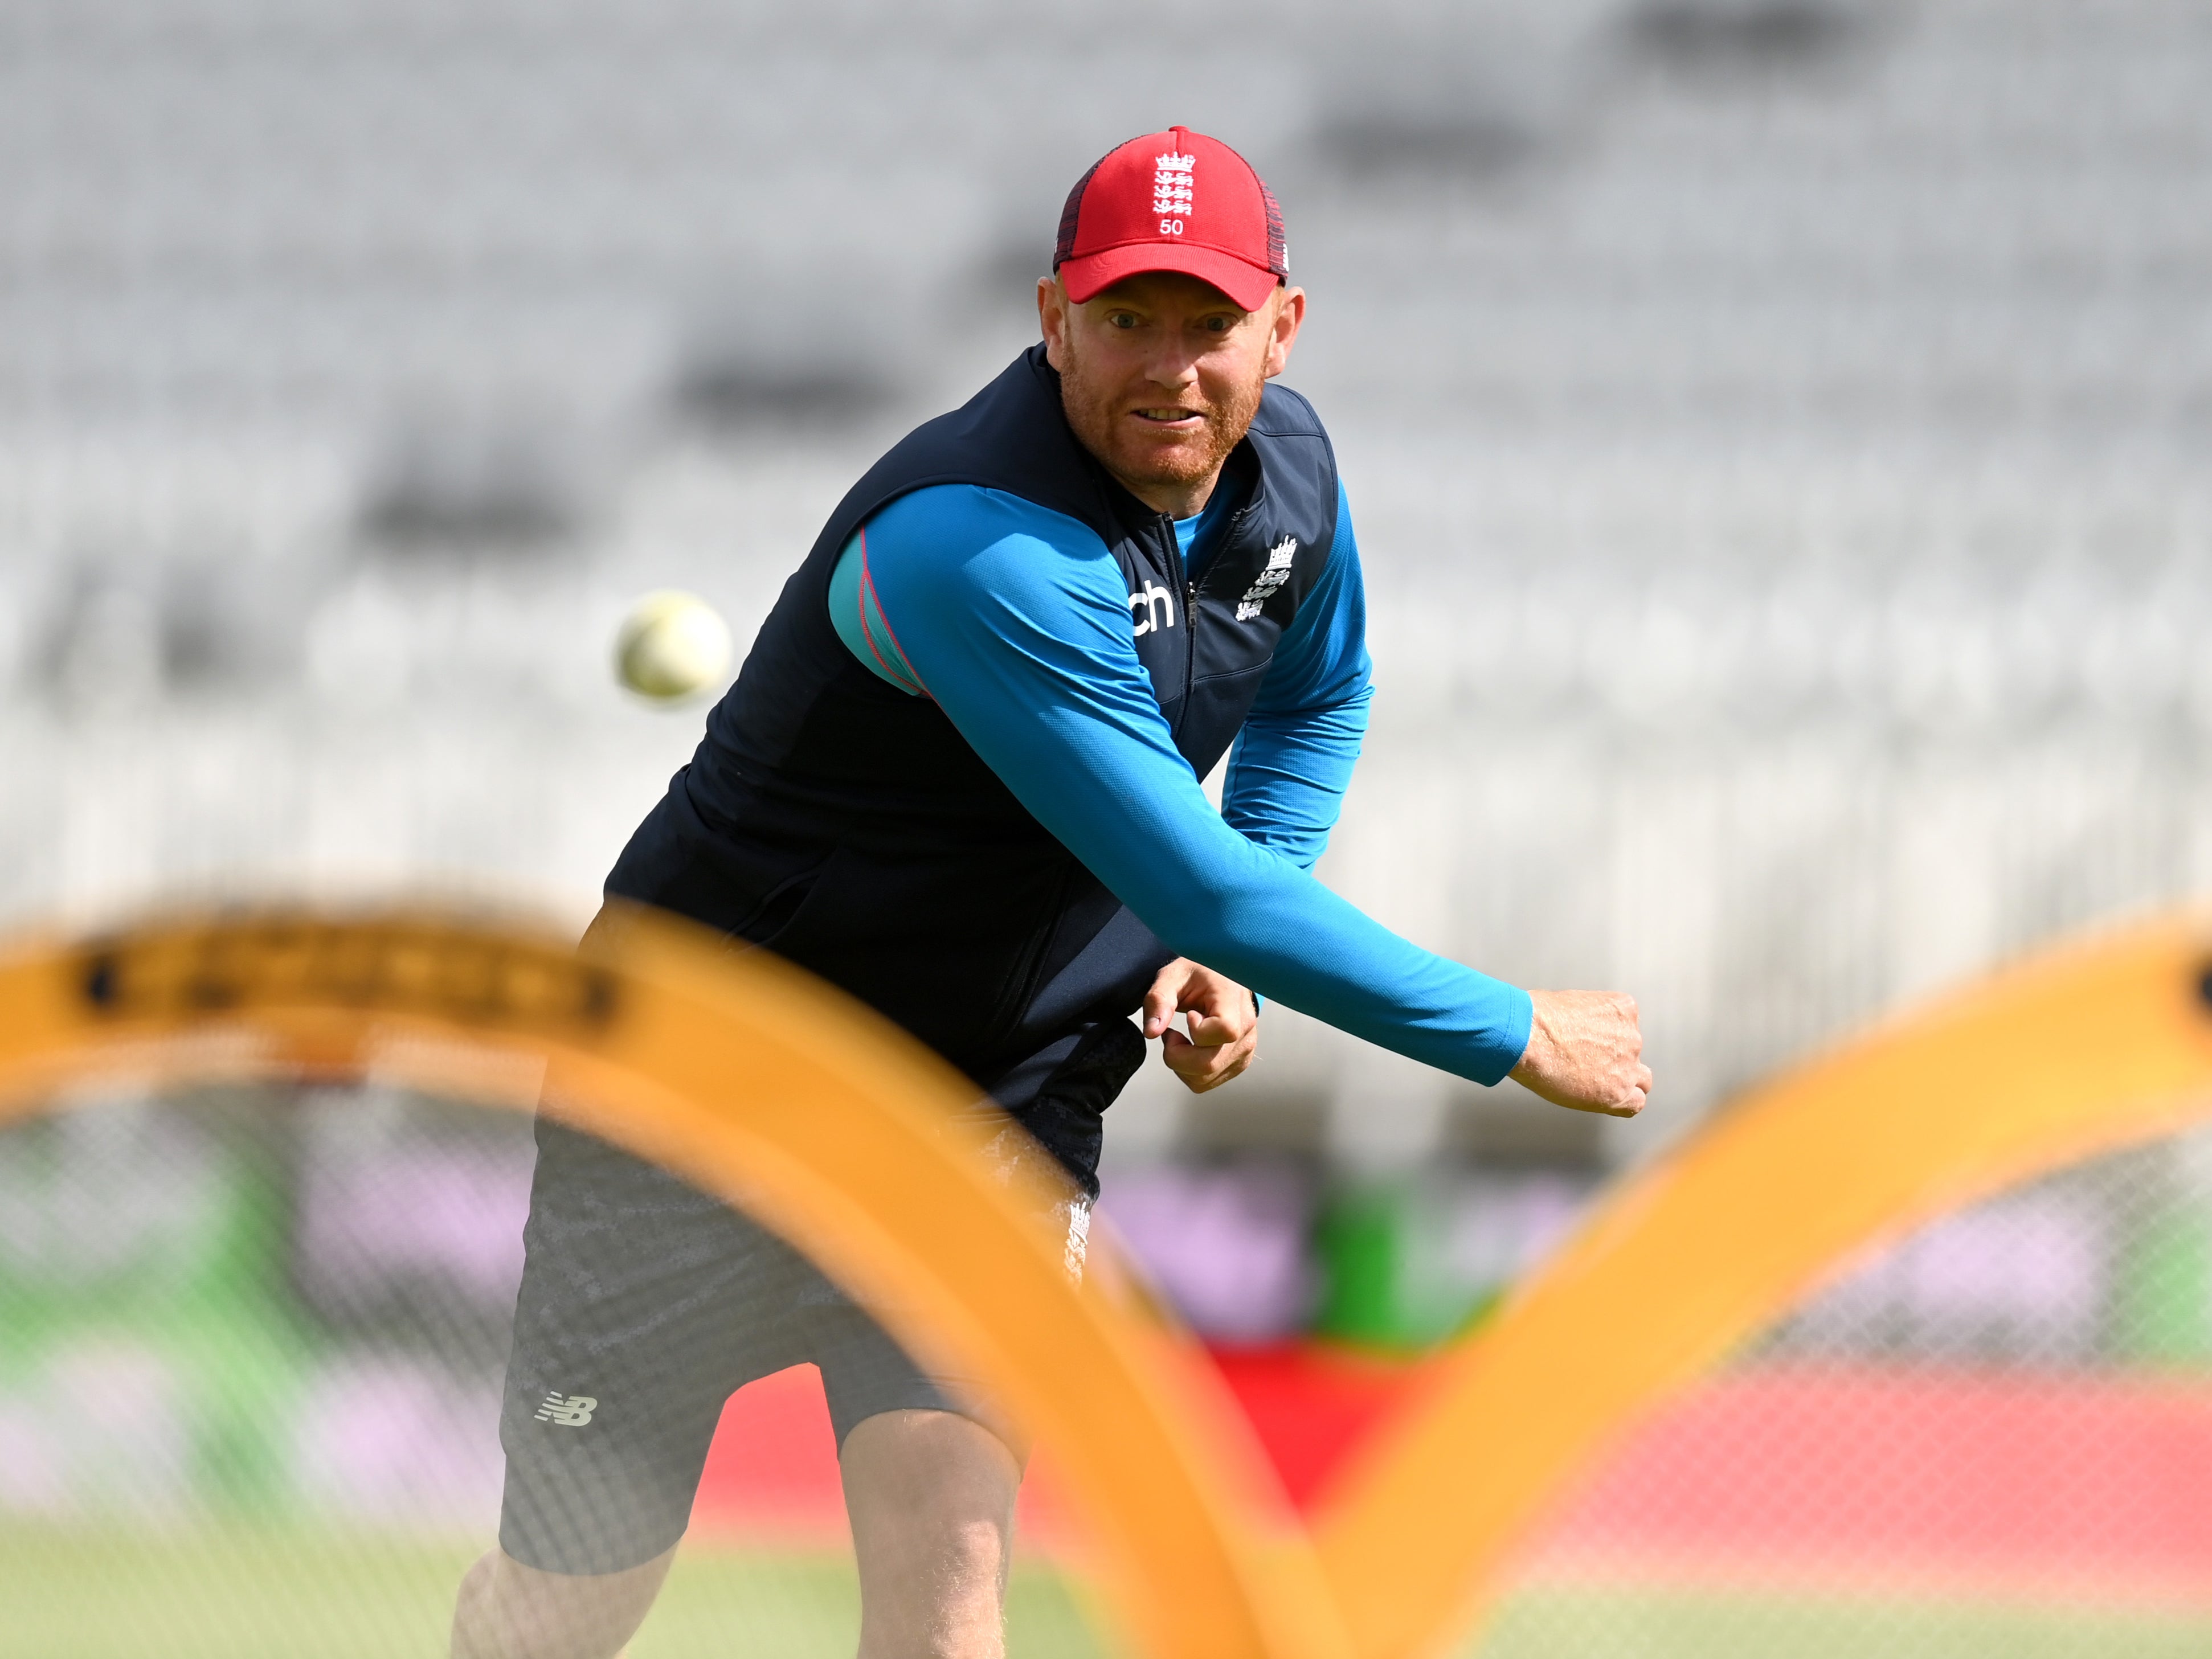 England take on Pakistan in a three-match series